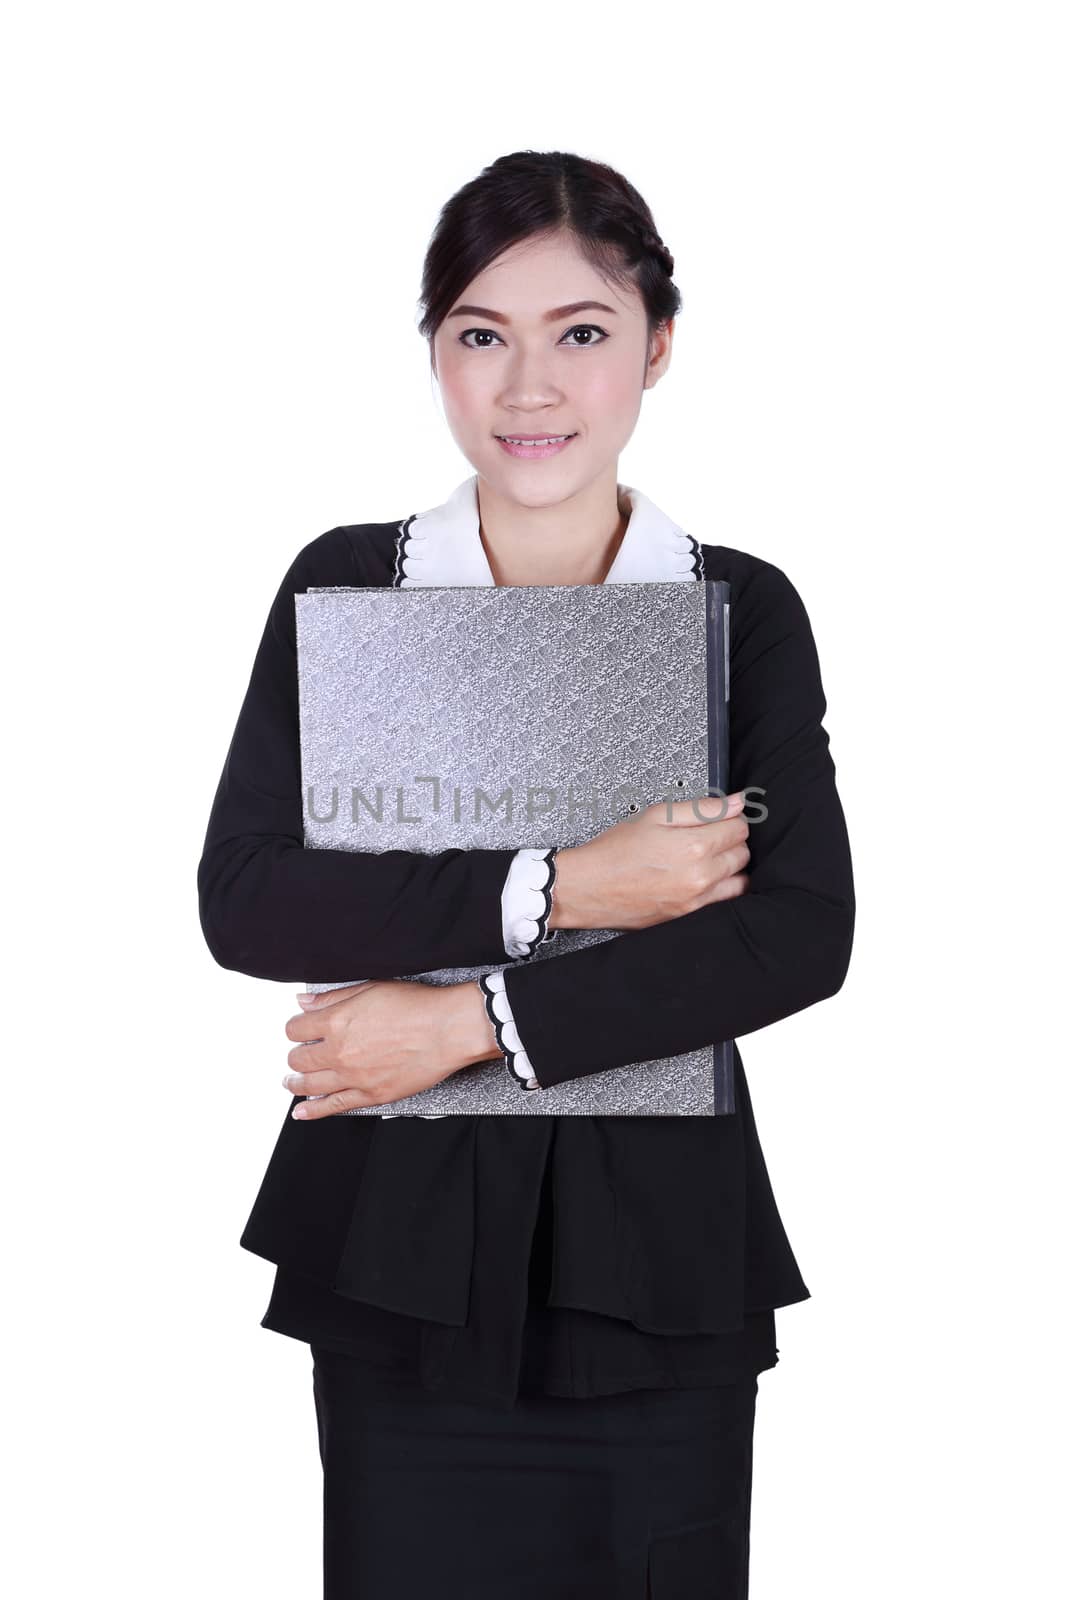 business woman confident smile holding folder documents isolated on white background